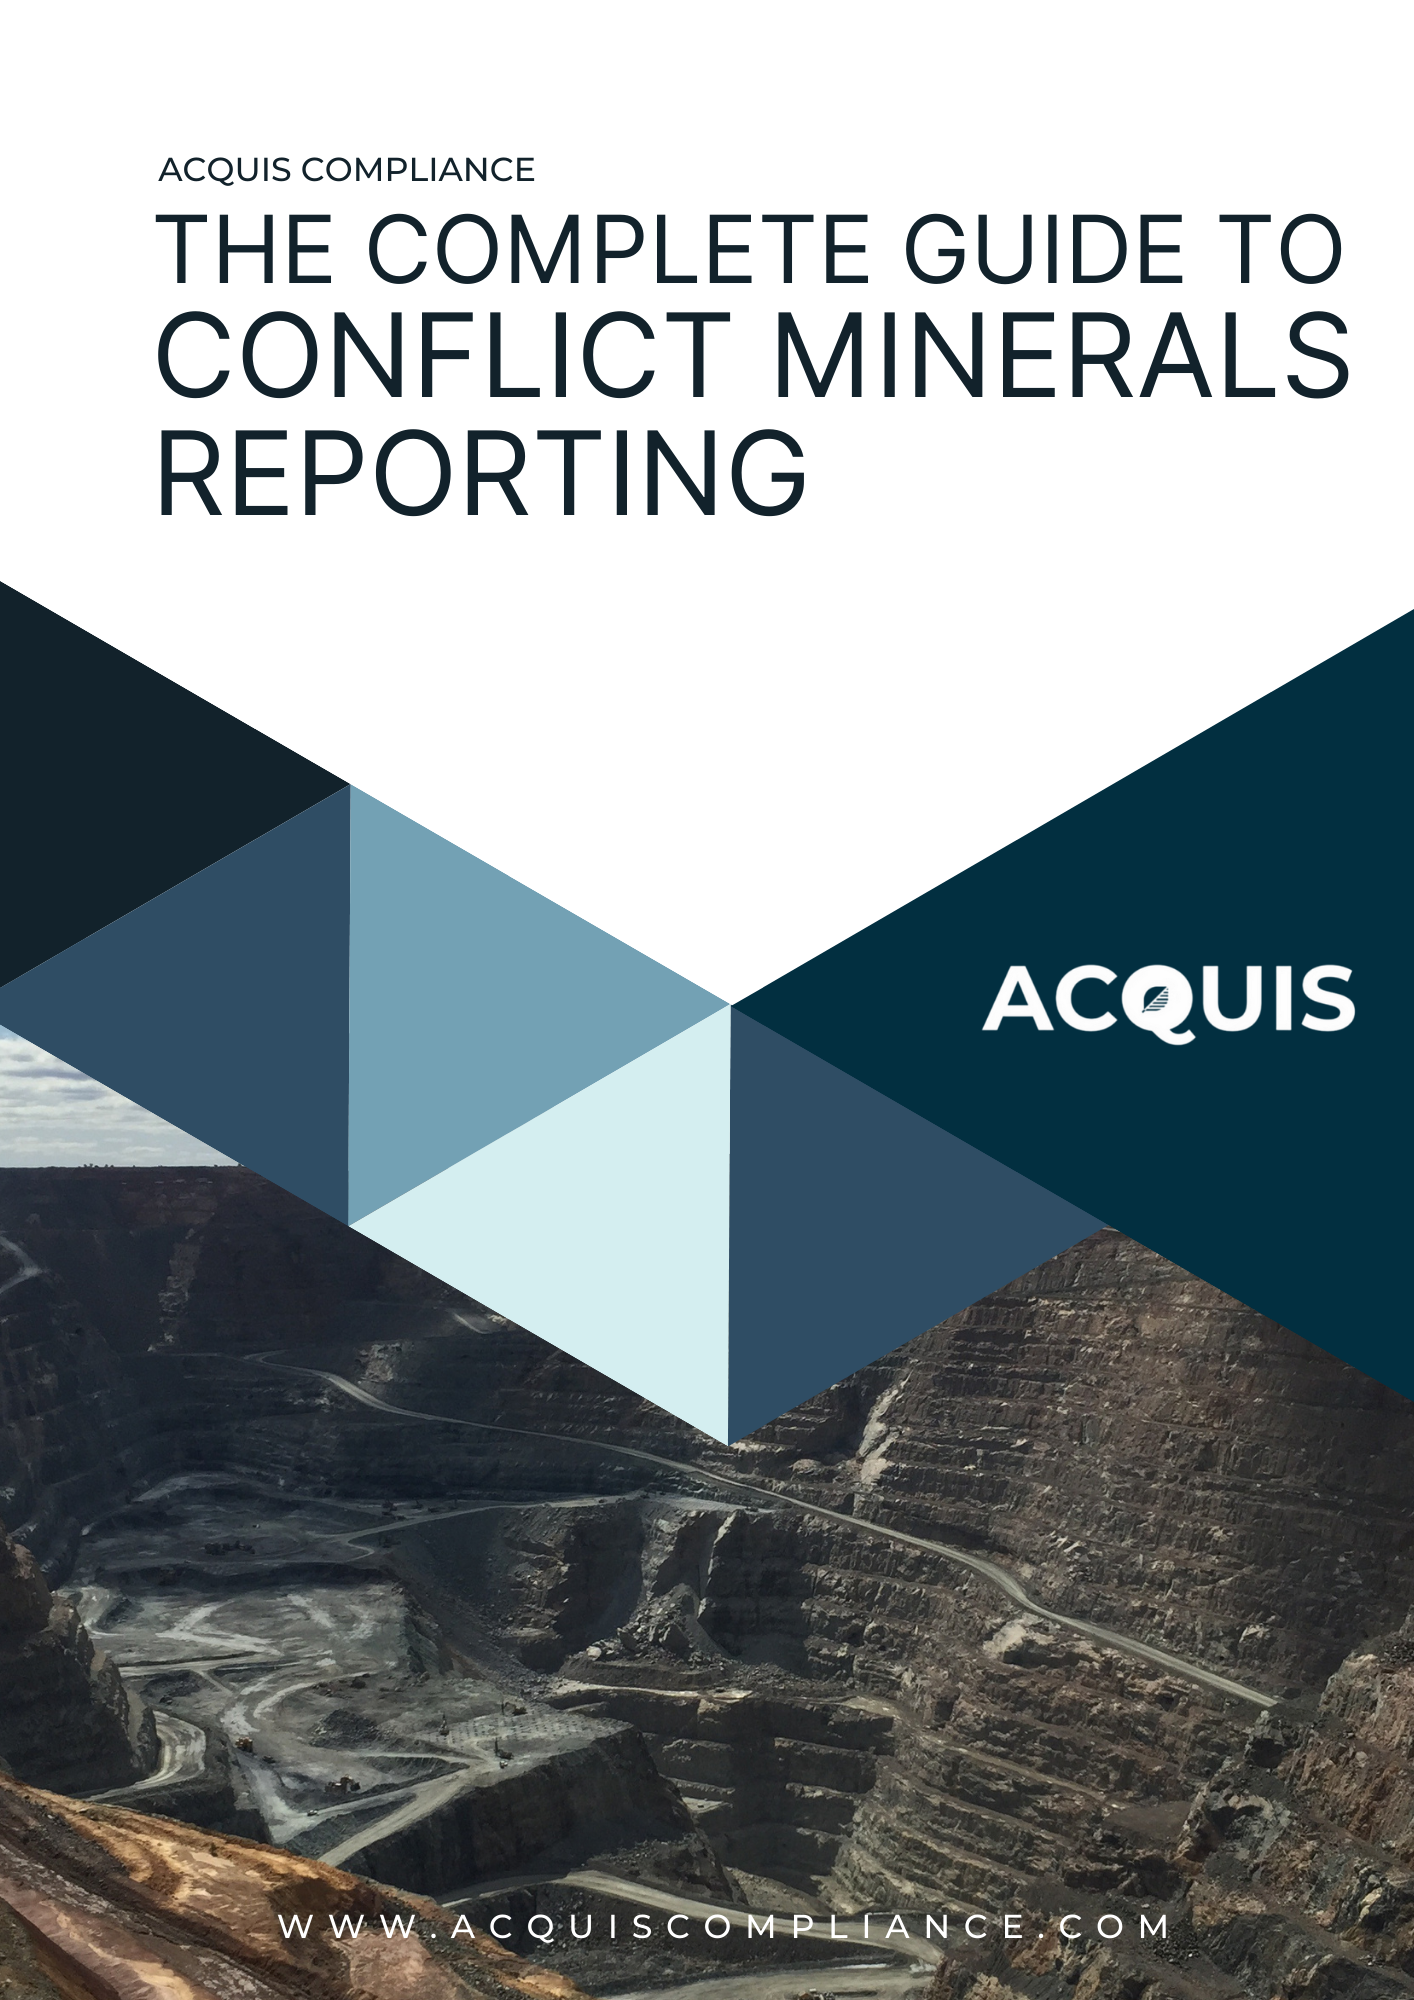 Are you ready to simplify your conflict minerals compliance program with Acquis?